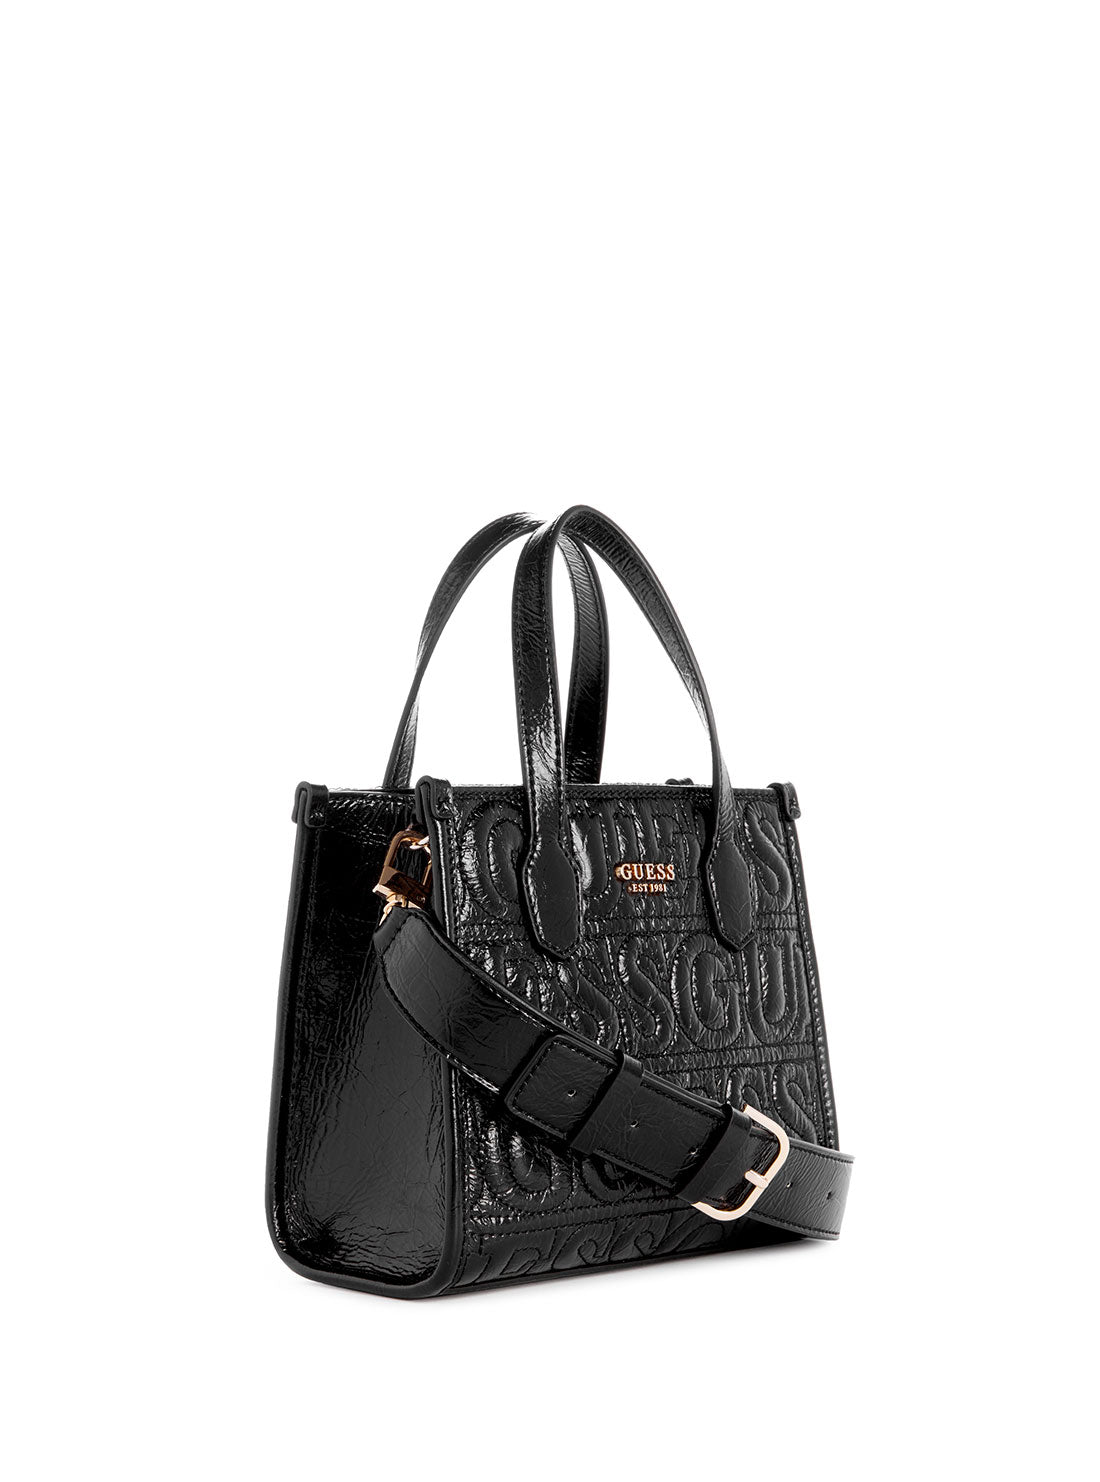 GUESS Women's Black Silvana Quilted Mini Tote Bag EG866577 Angle View